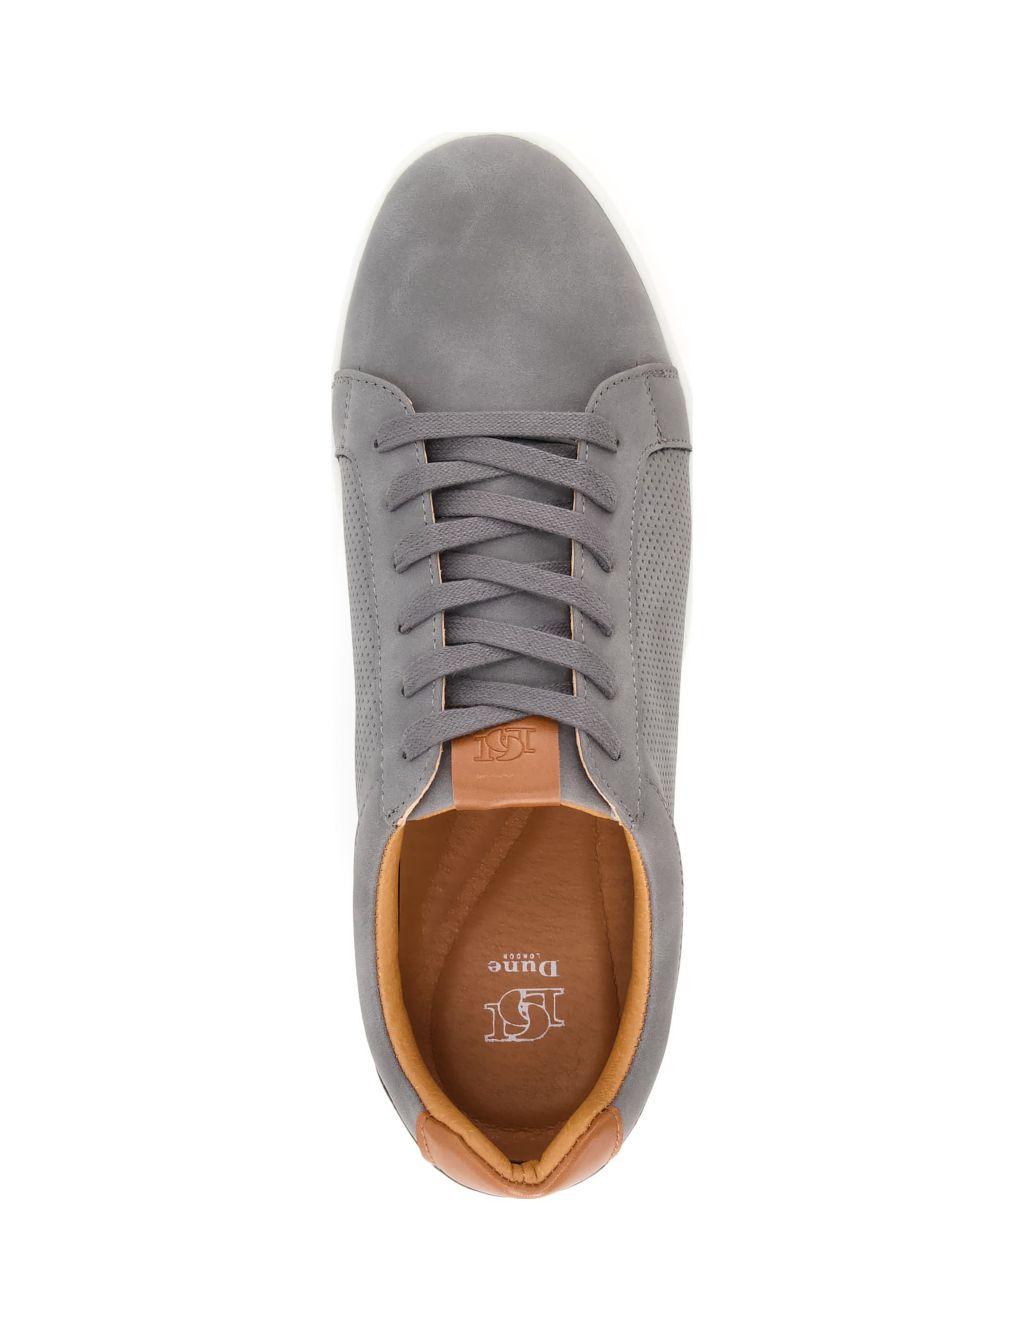 Suedette Lace Up Trainers image 4